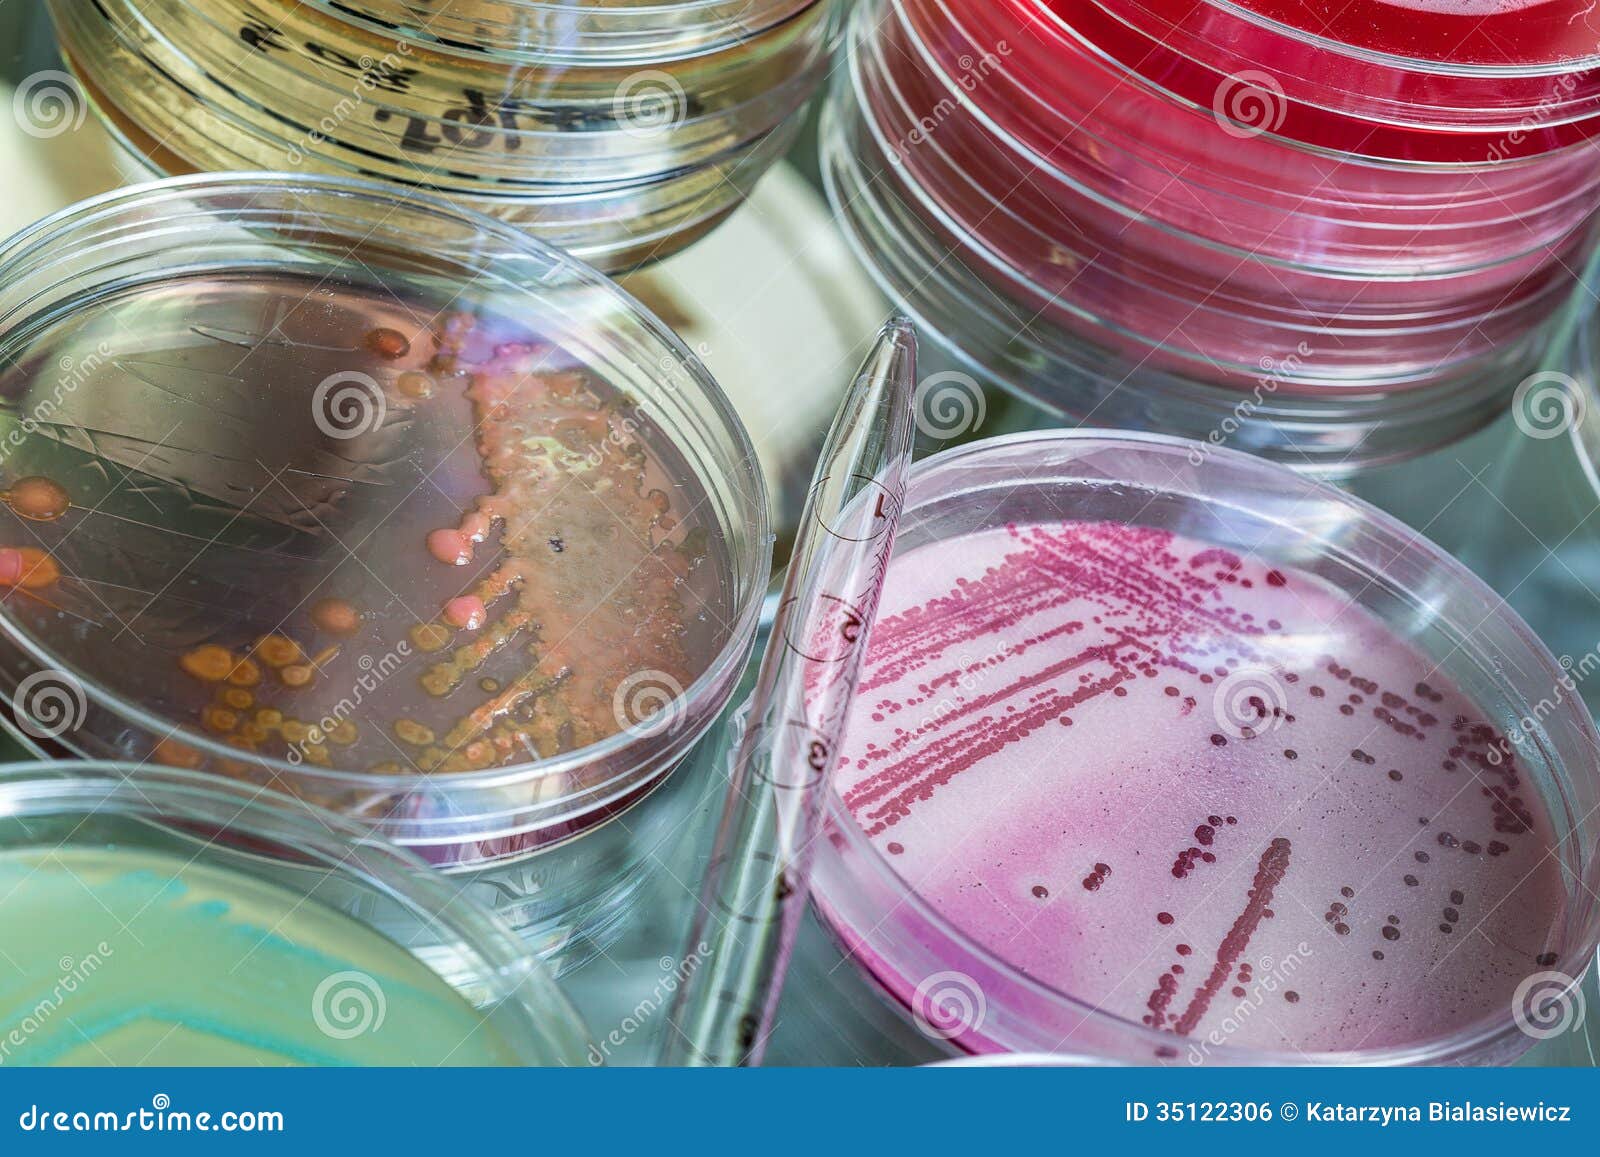 How to Collect Samples and Test for Mold or Bacteria